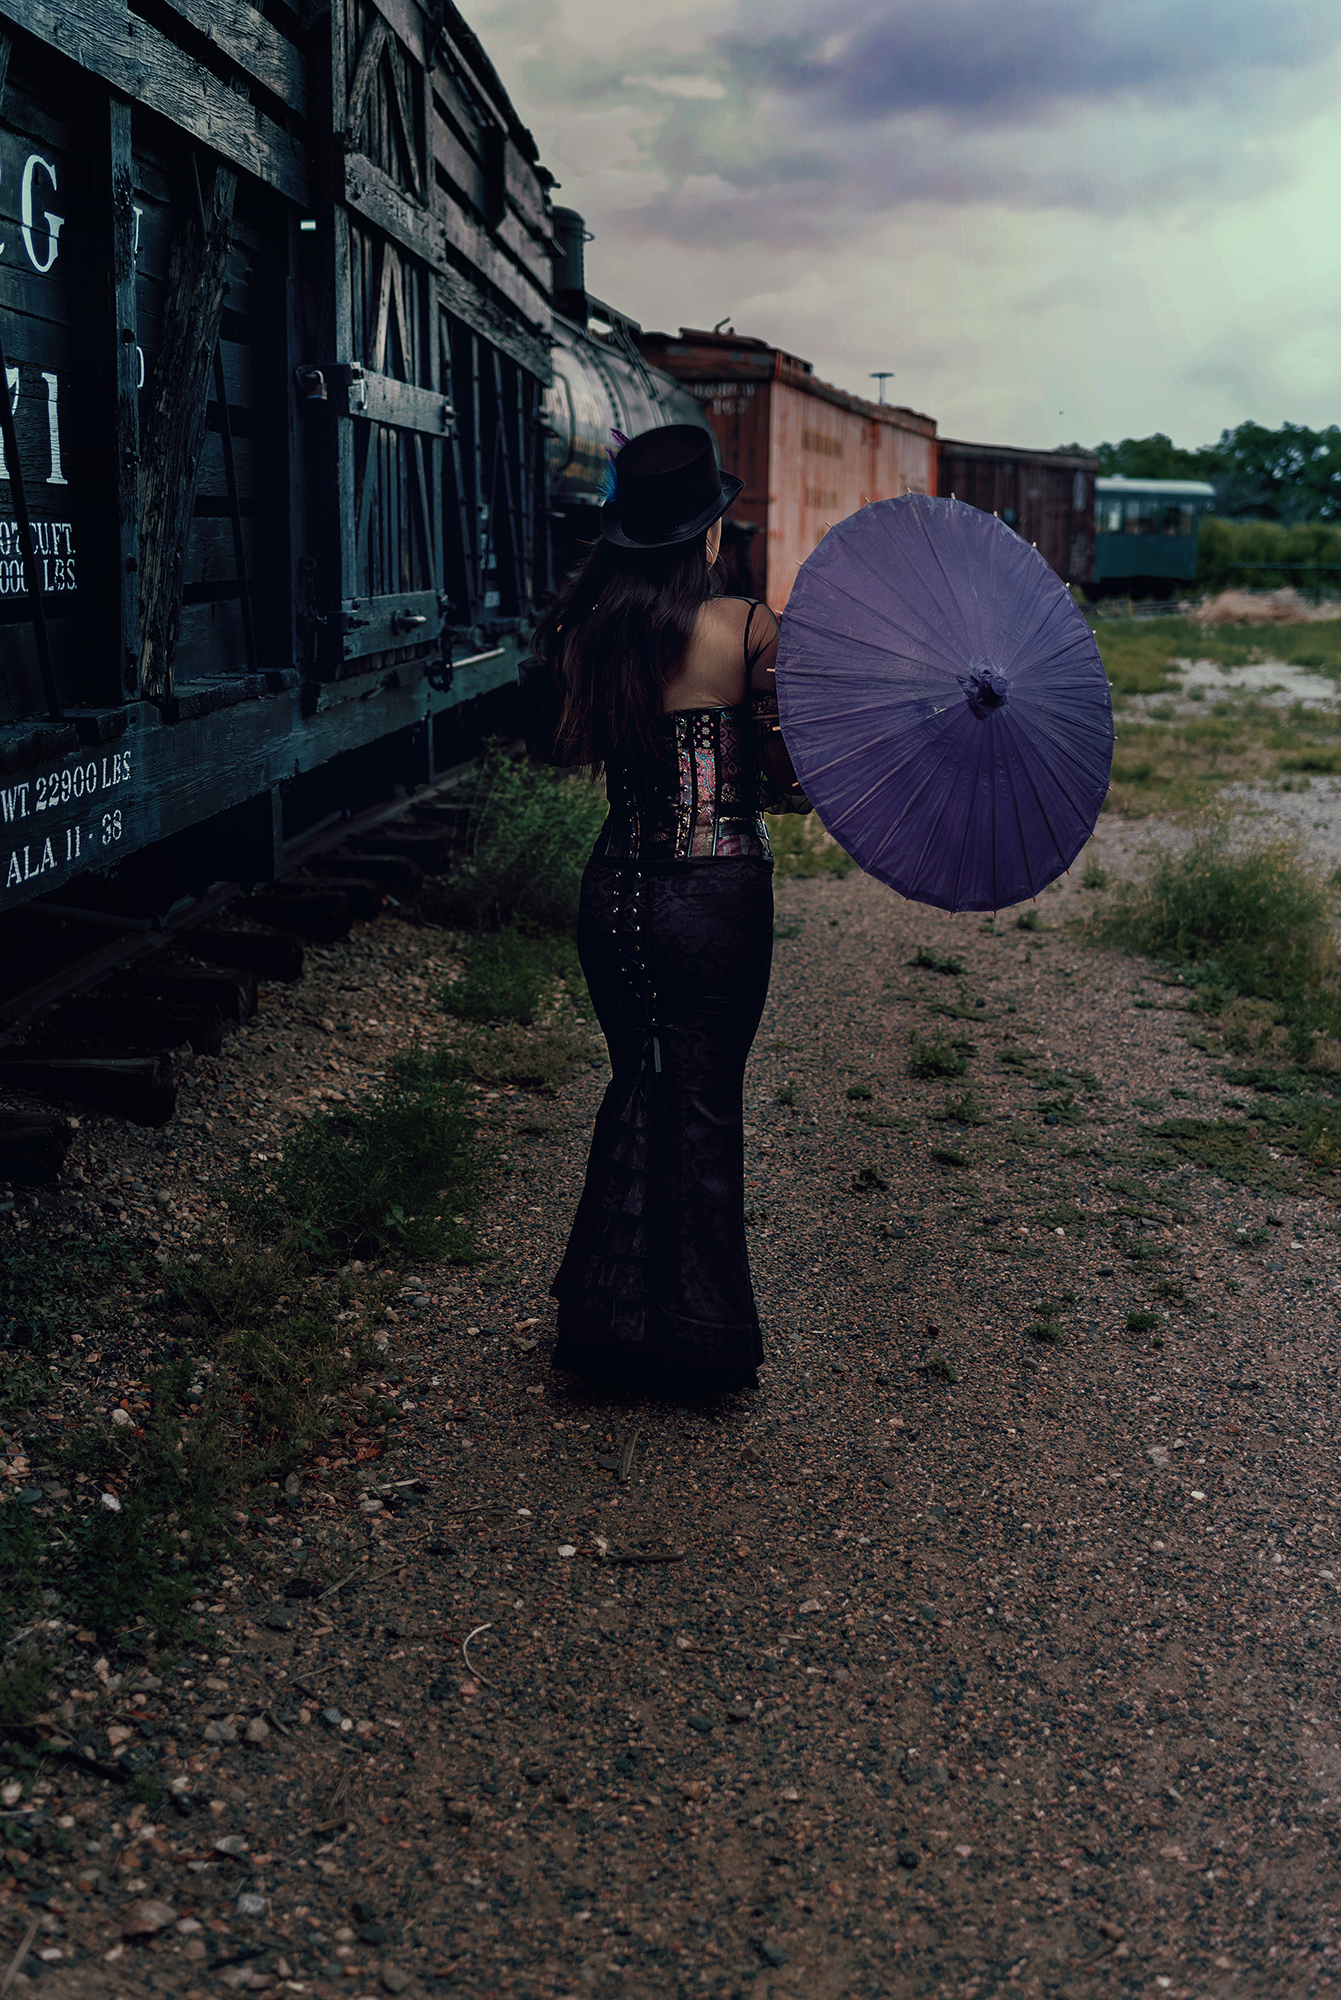 A photo of a woman from behind, she walks next to vintage train cars wearing a Victorian style steampunk outfit and holding a purple parasol.